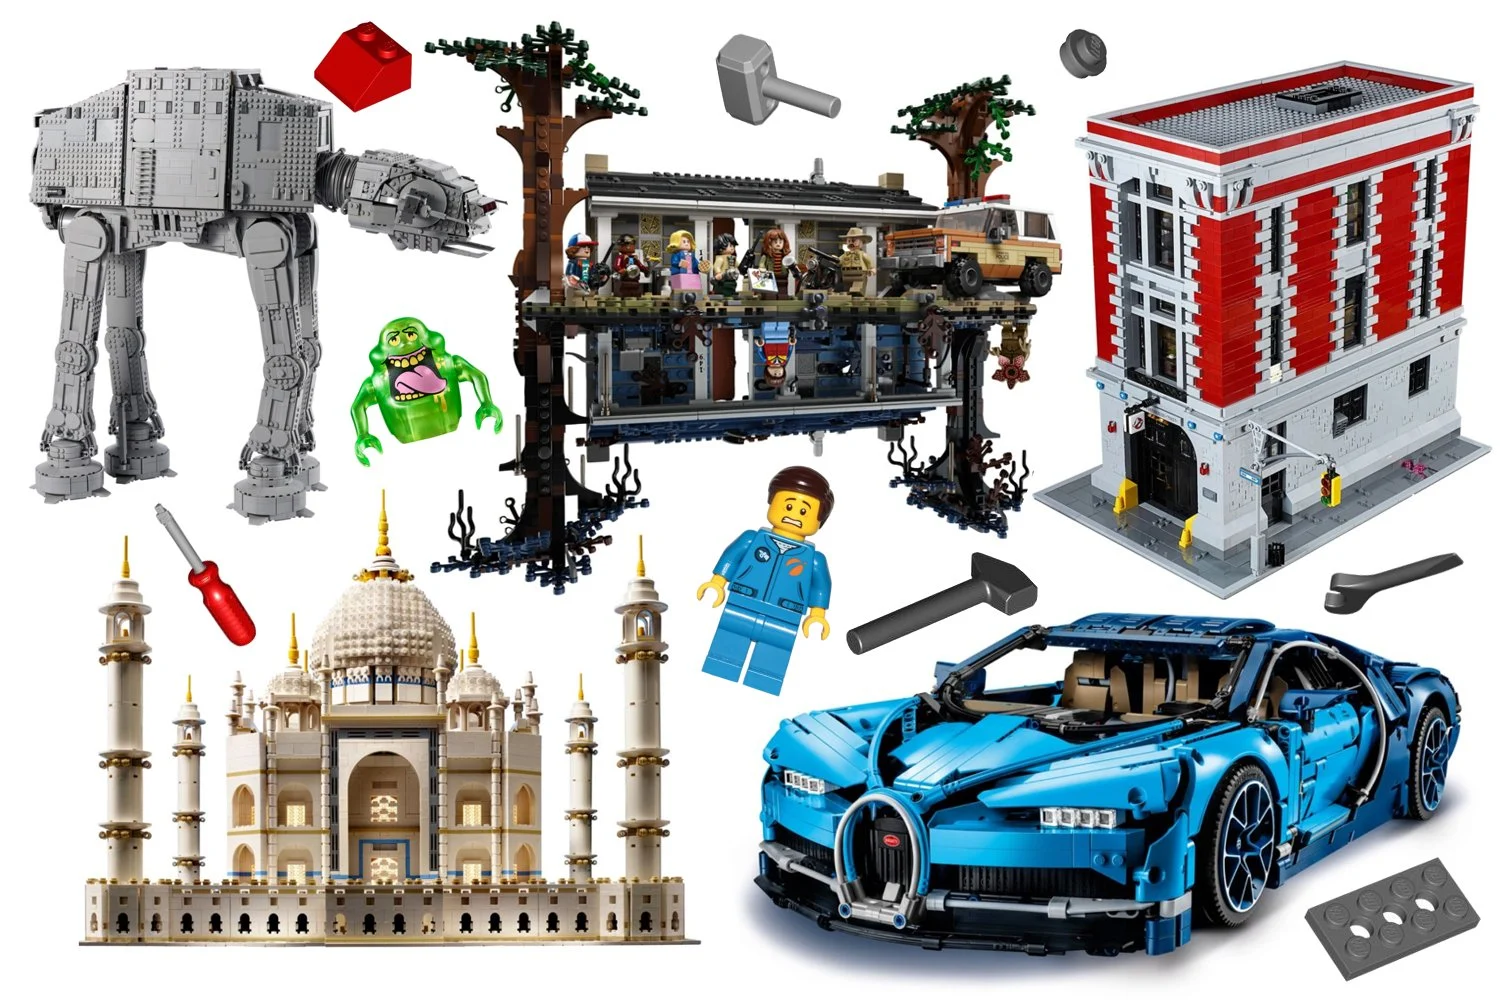 10 Hardest LEGO Sets to Build in 2022: Ranked by Difficulty Level